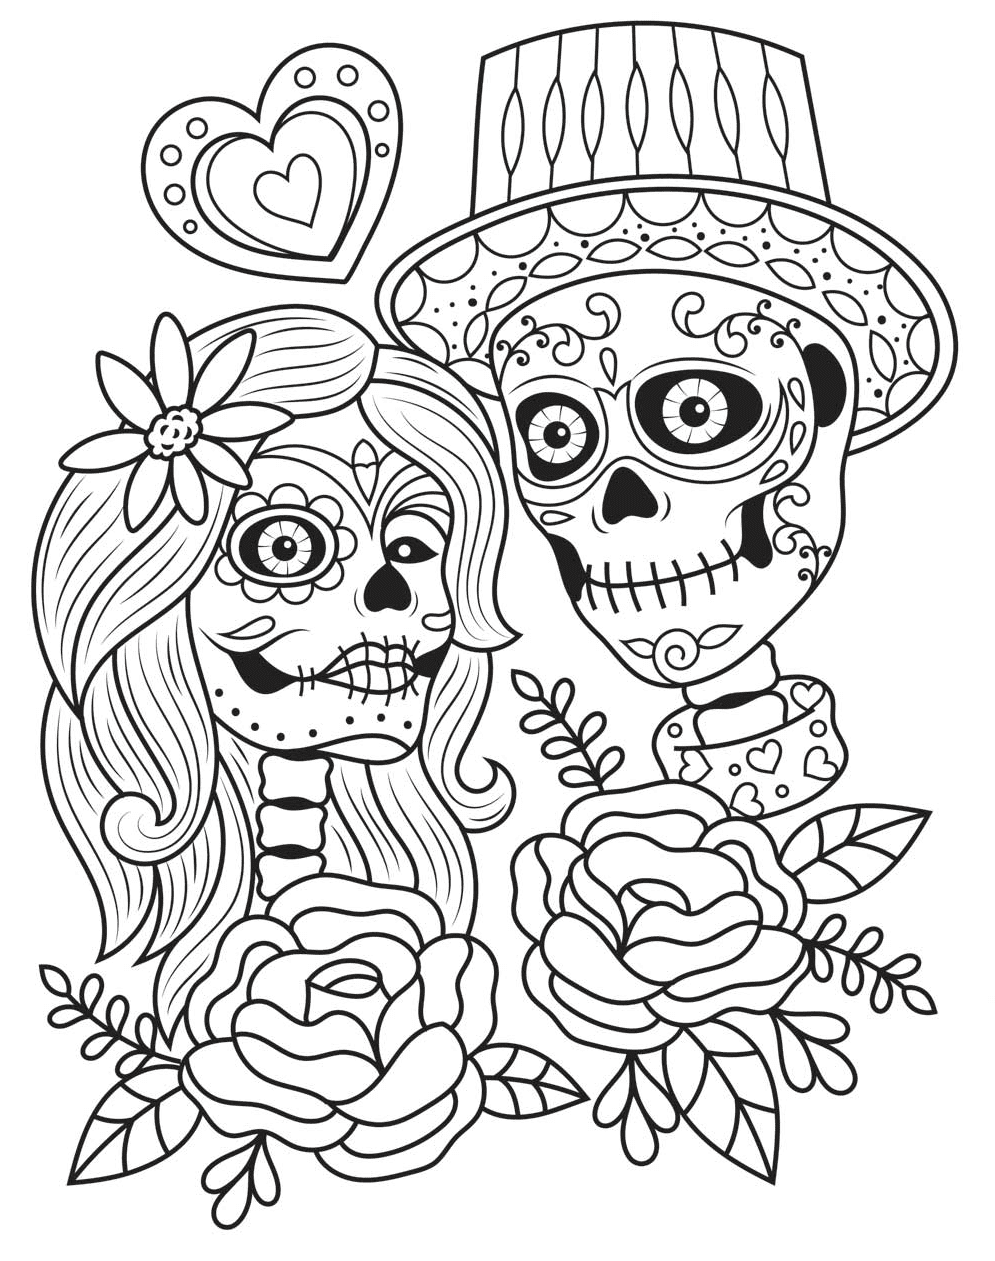 Day of the dead coloring pages printable for free download